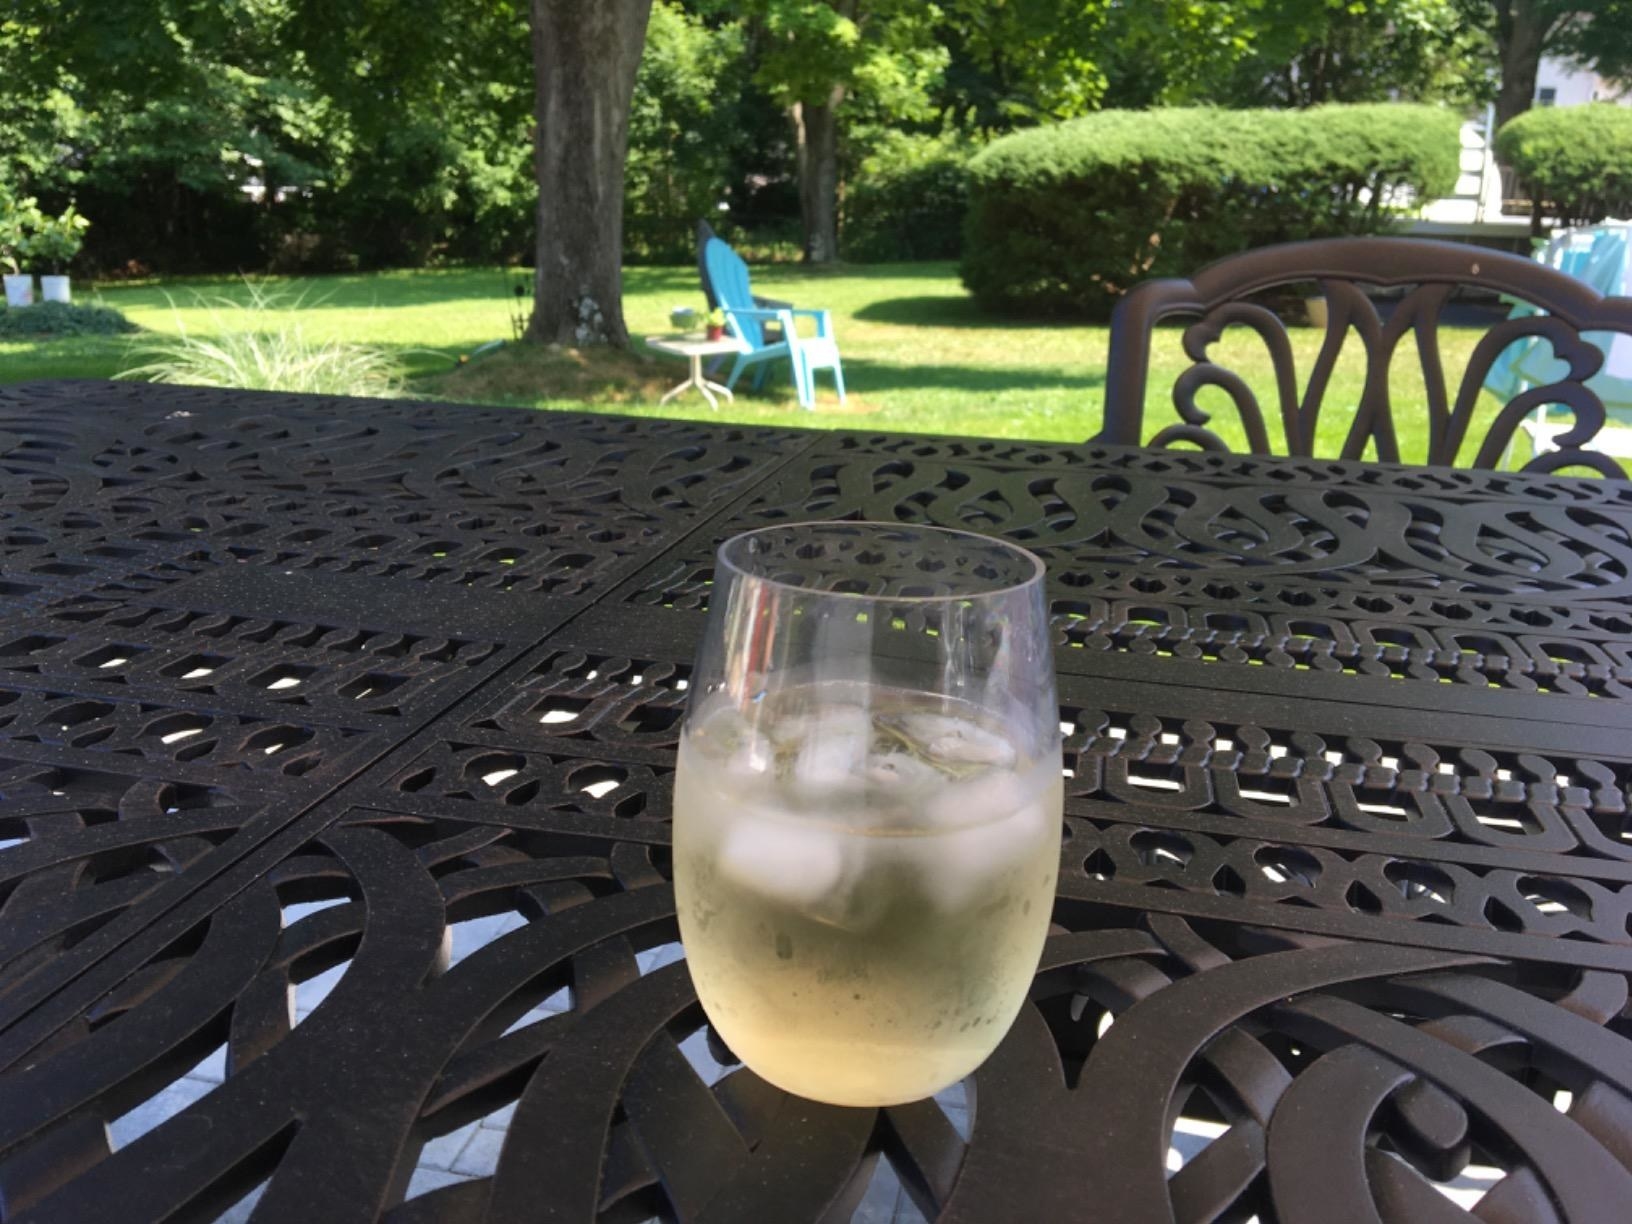 Reviewer photo of a wine glass with wine in it outside